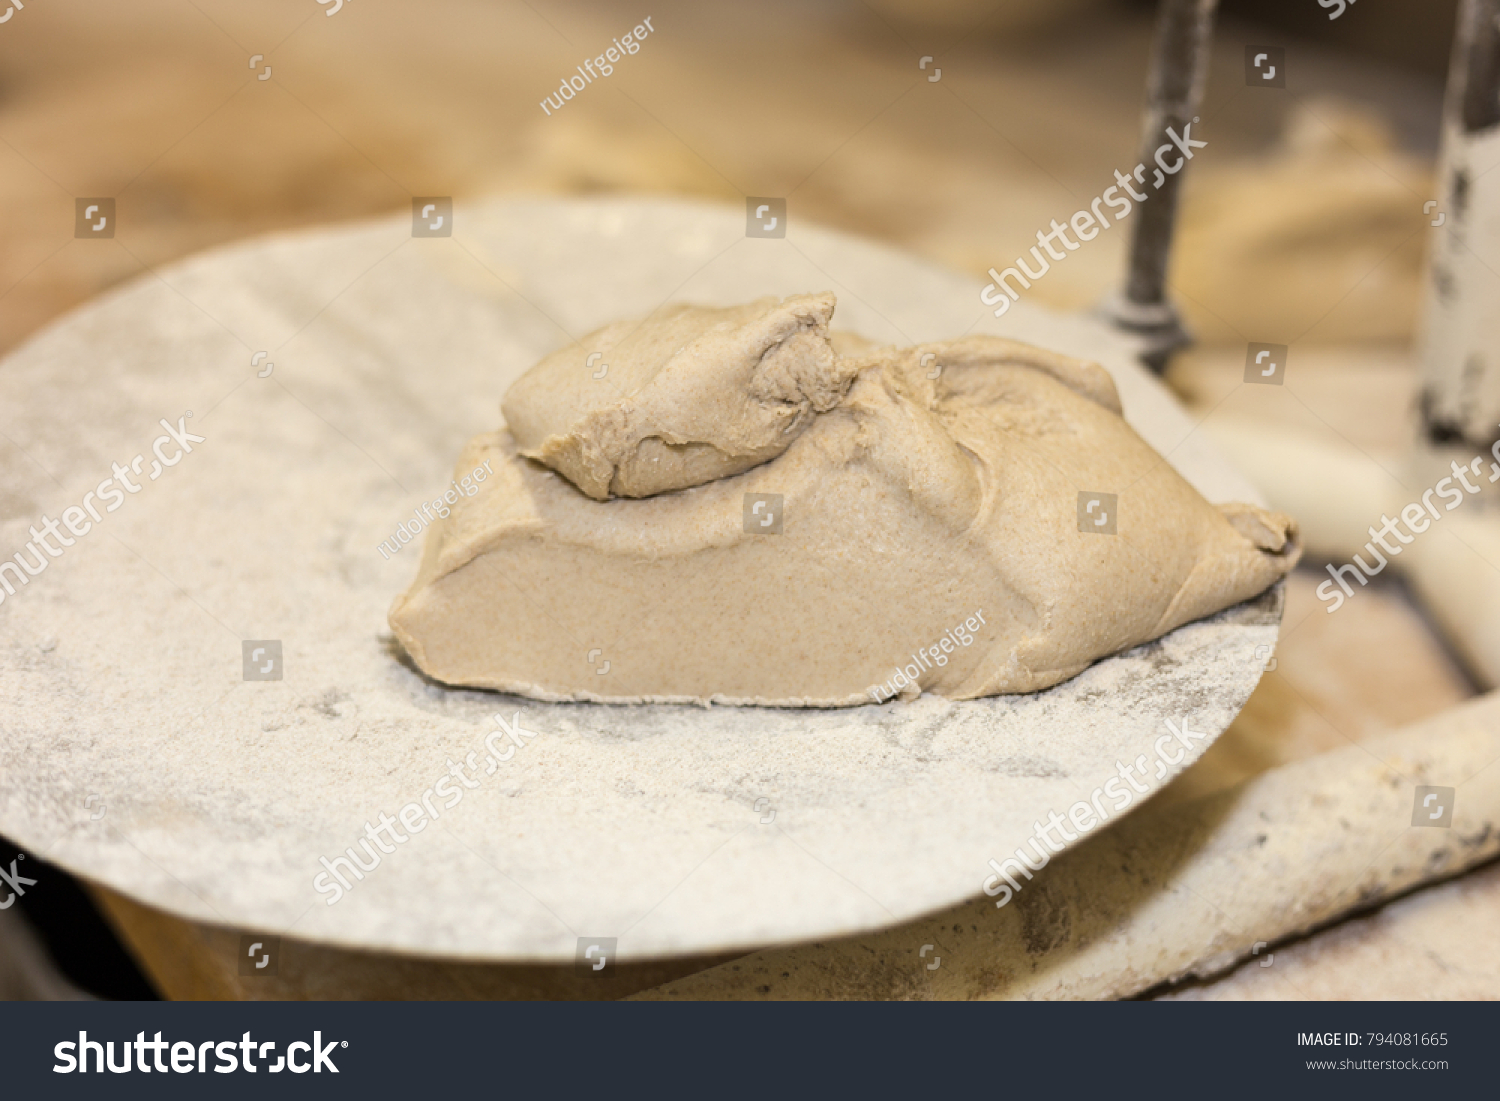 preparation of baked goods in a bakery with tools for preparing pastries #794081665